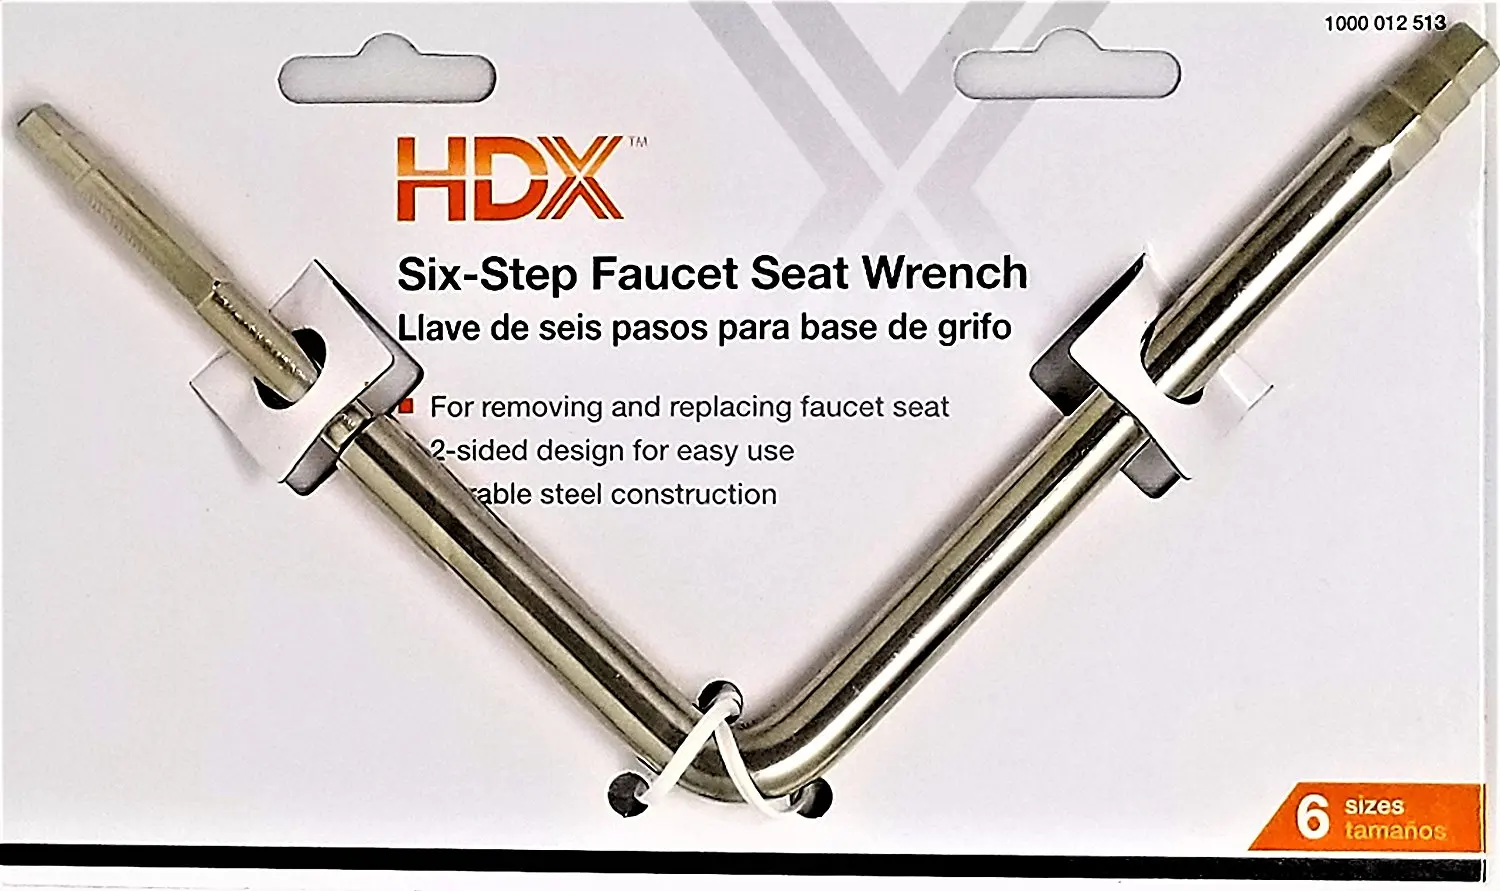 Hdx Tapered Faucet Seat Wrench Steel Tool 2 Sided Fits Most Sizes